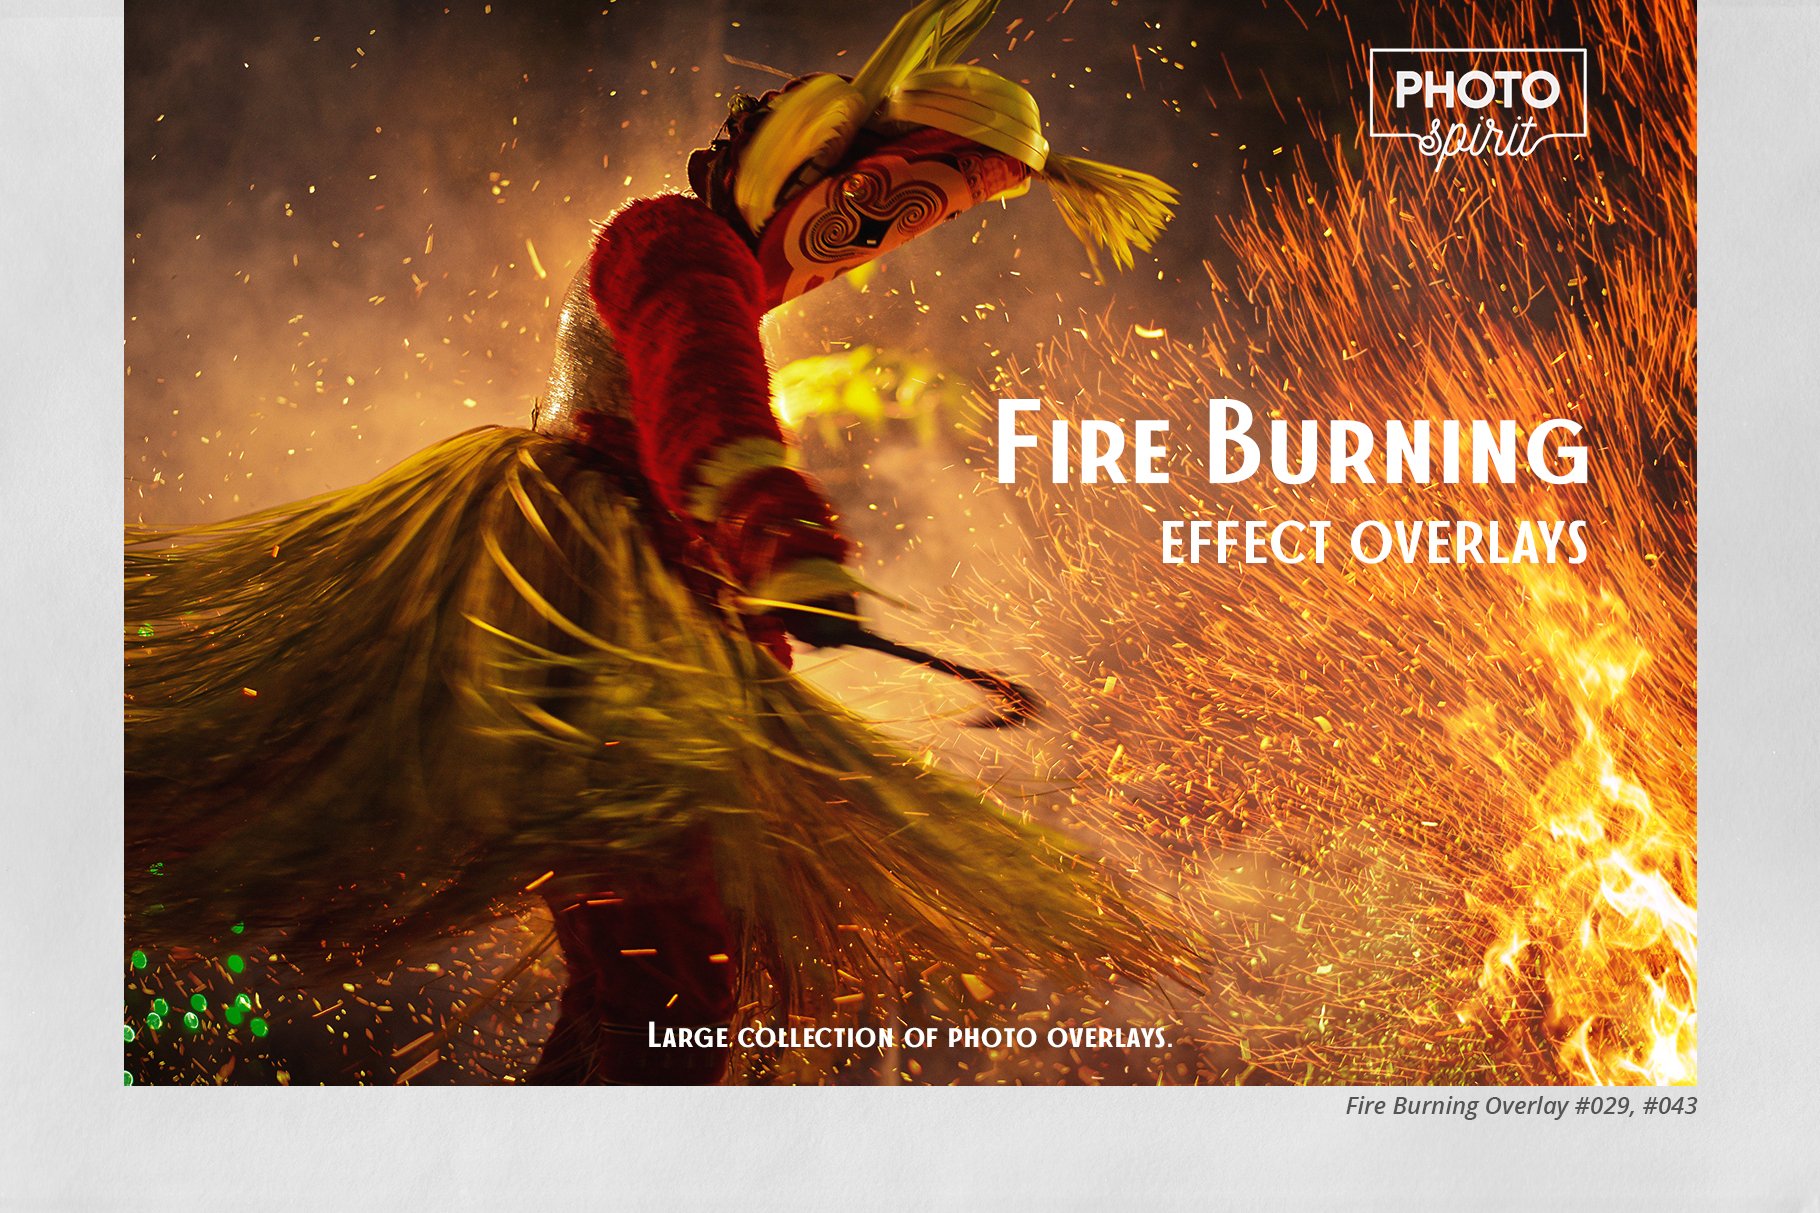 Fire Burning Effect Overlayscover image.